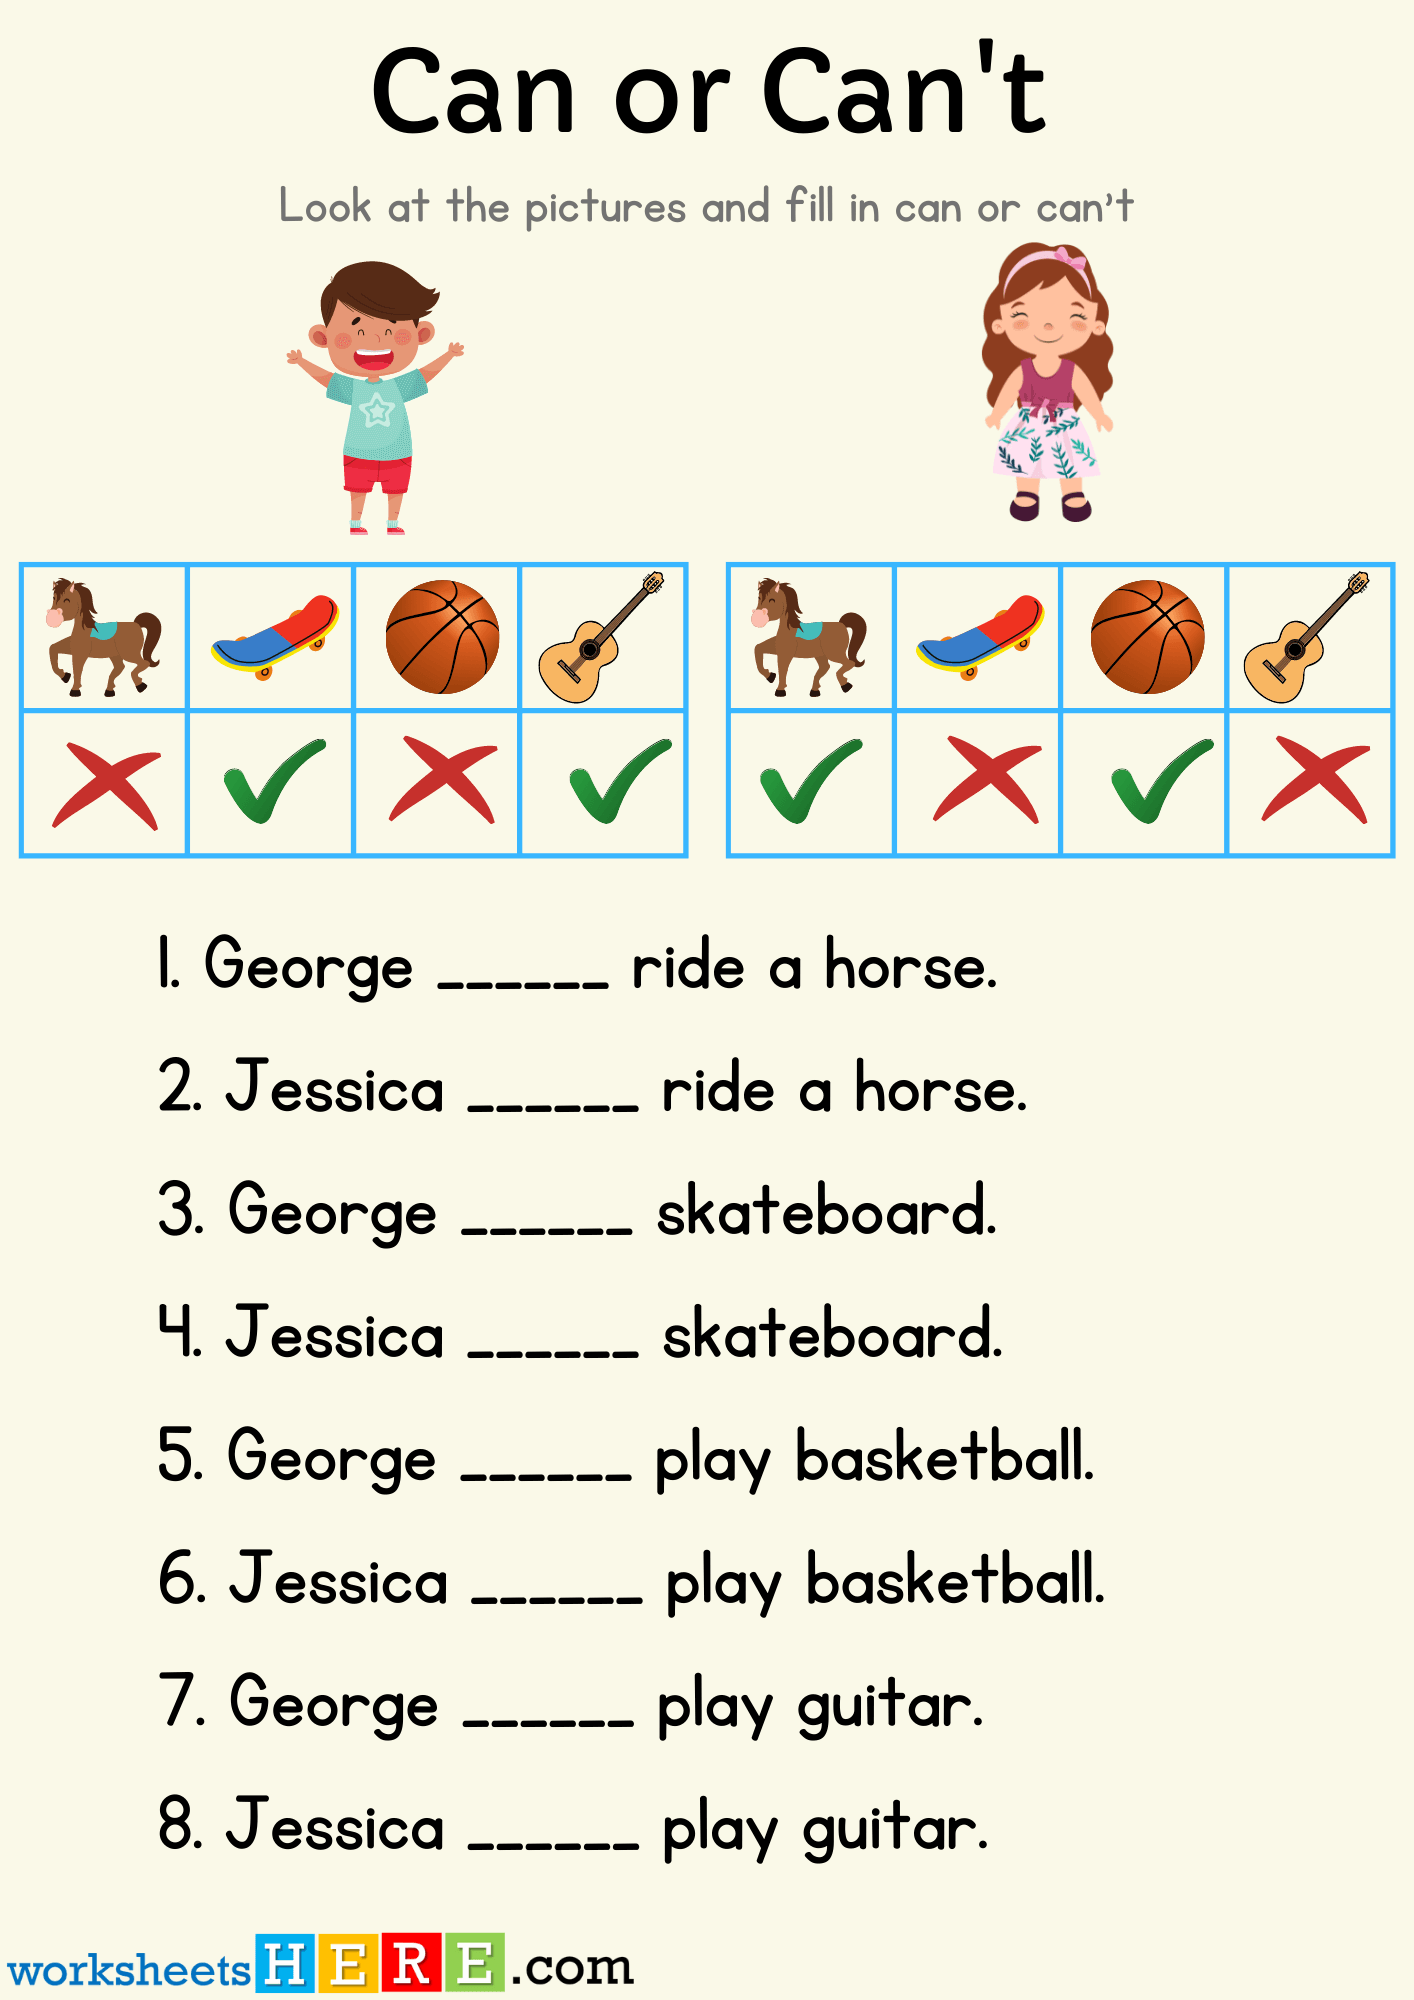 Can or Can’t Exercises, Answers with Pictures Examples PDF Worksheet For Kindergarten